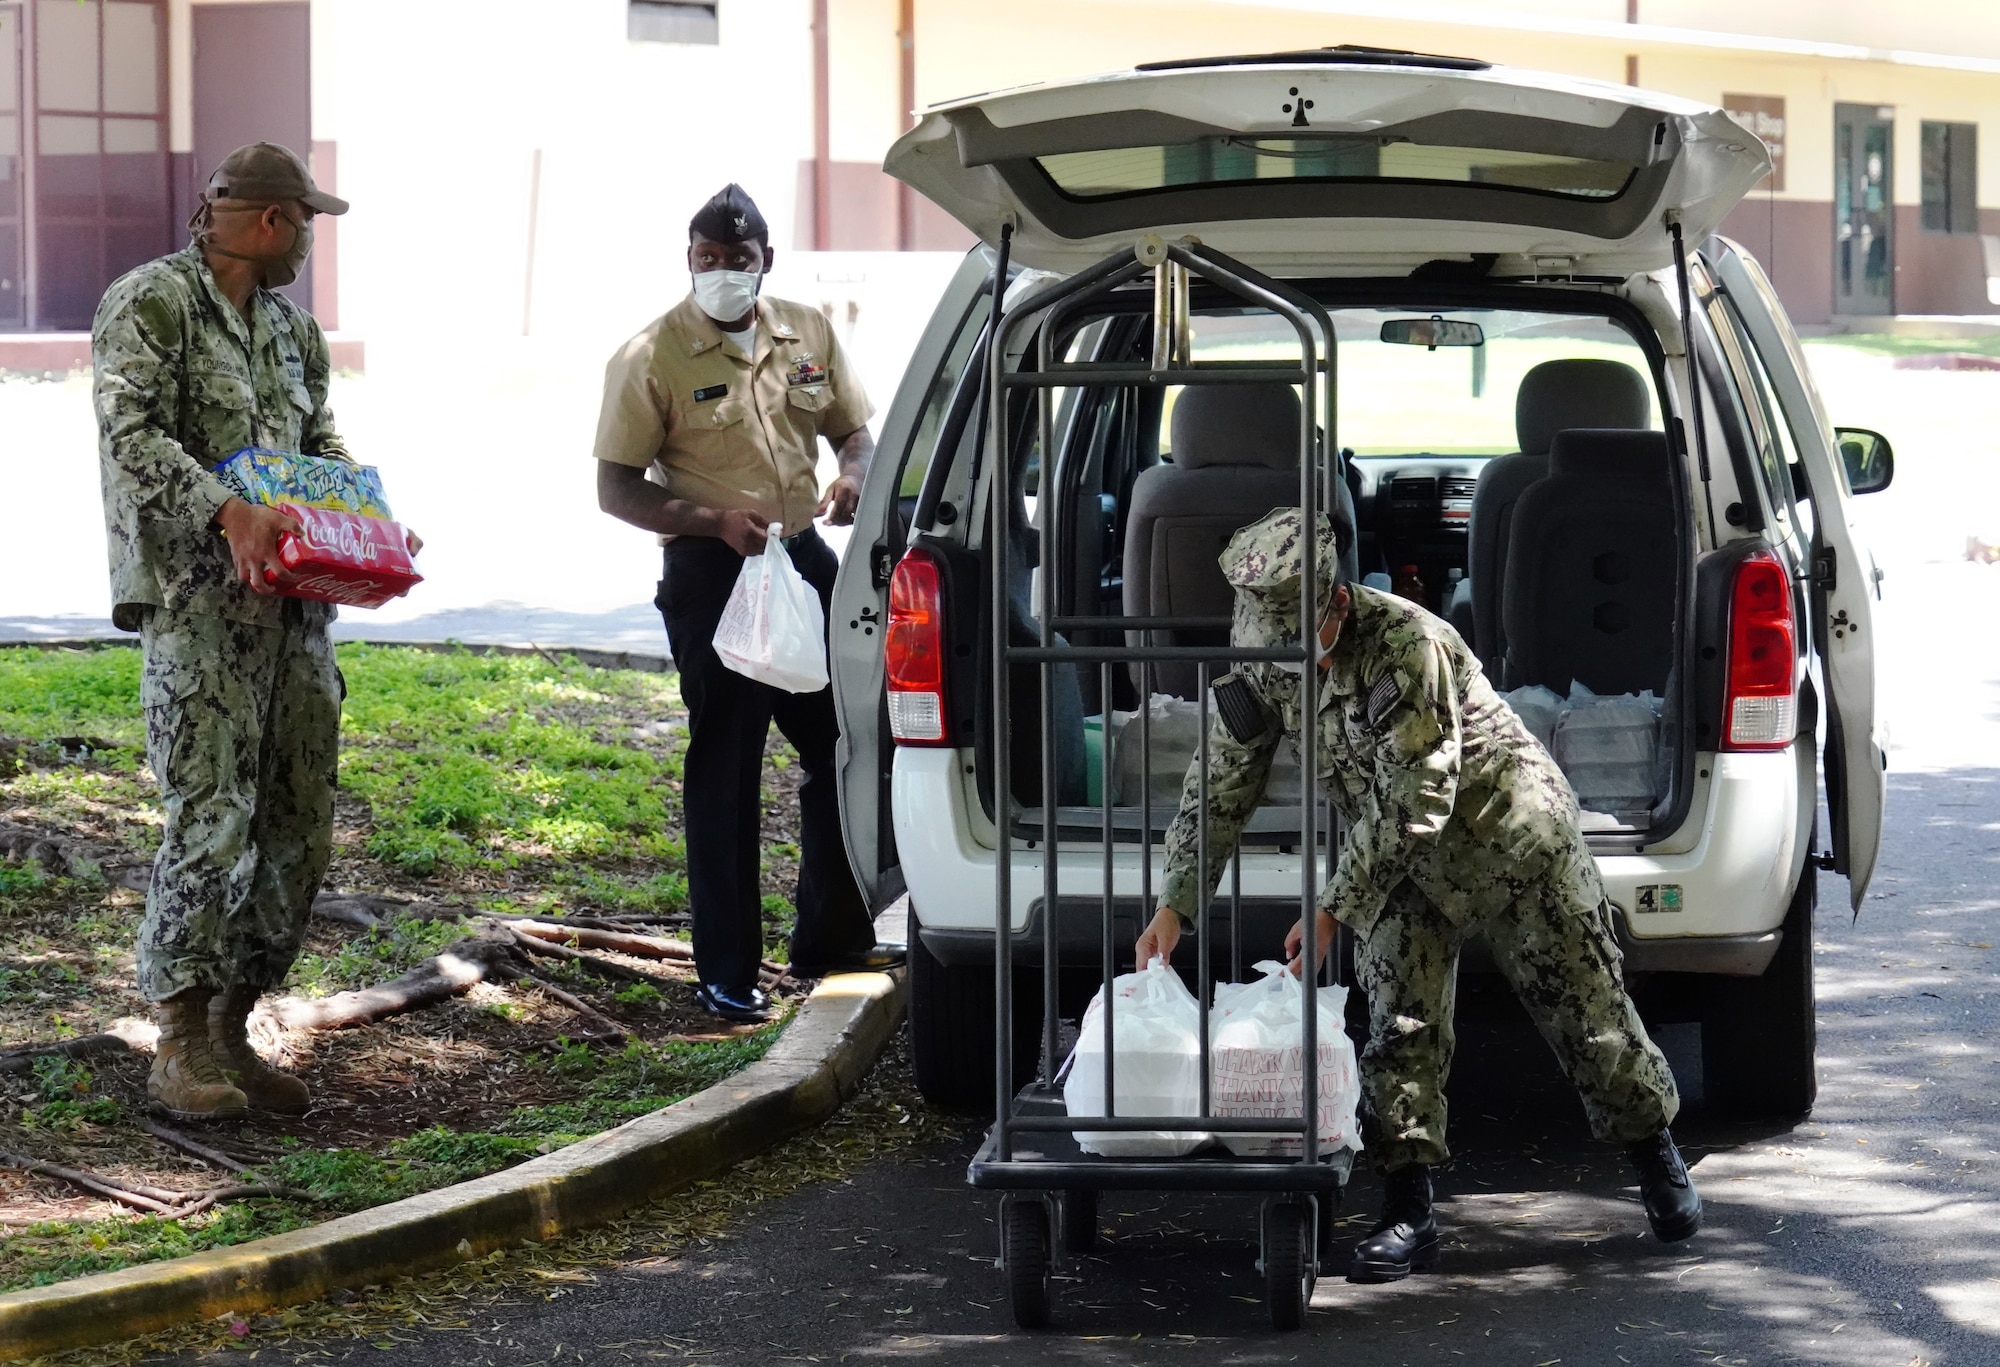 U.S. Navy Sailors volunteering for the COVID-19 Support Team unload meals from the Hale Aina Dining Facility on Joint Base Pearl Harbor-Hickam, Hawaii, April 16, 2020. The program delivers meals and essentials to military personnel placed on restriction of movement due to the COVID-19 pandemic. (U.S. Air Force photo by Airman 1st Class Erin Baxter)